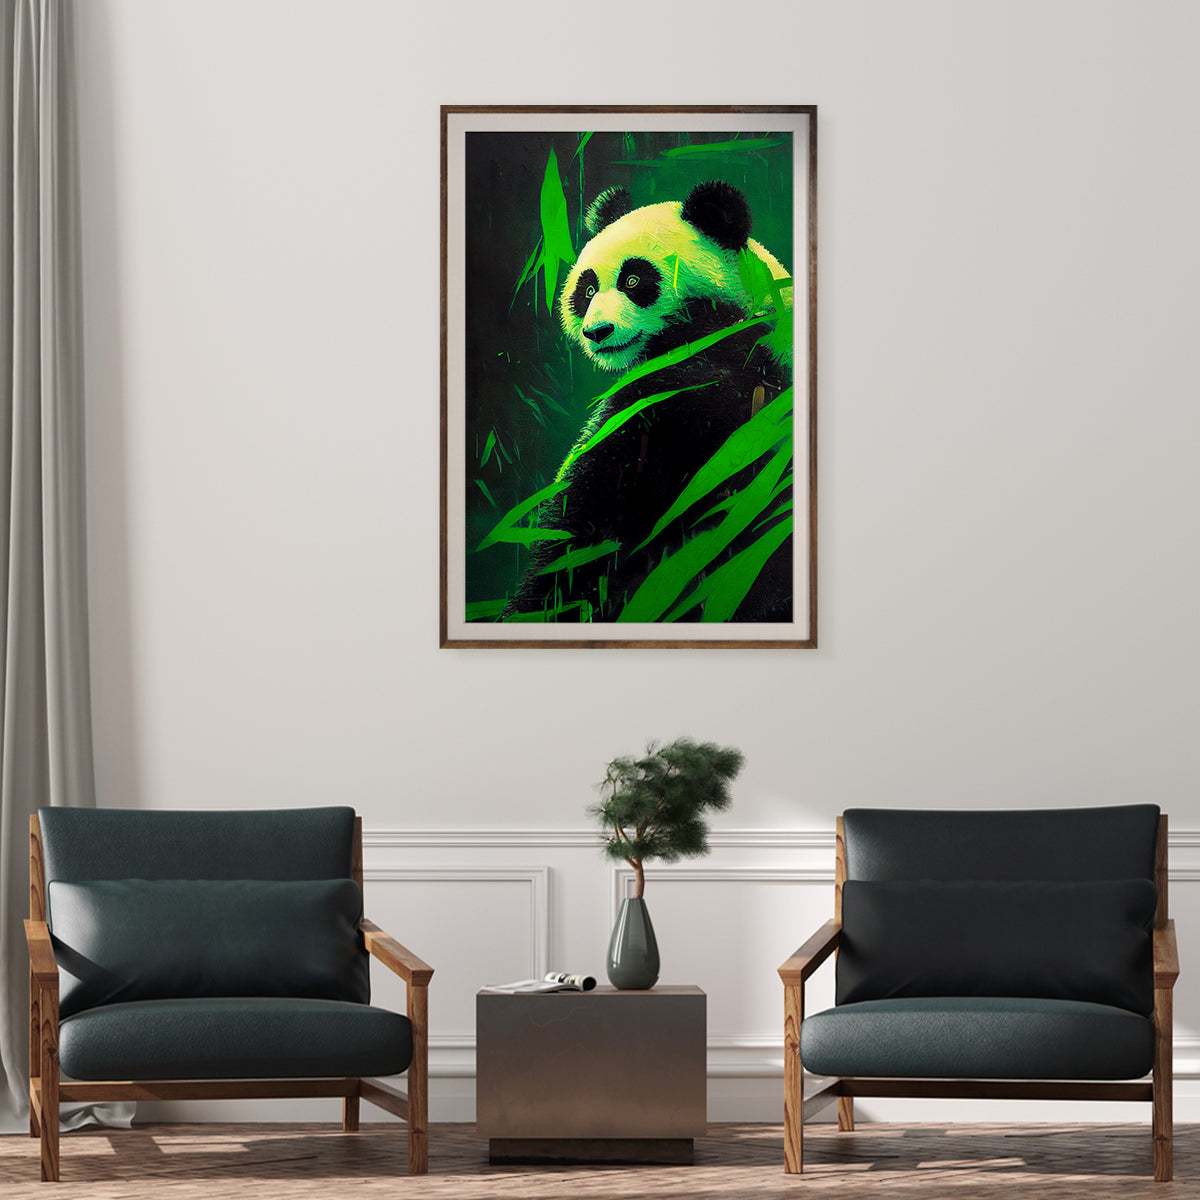 Panda in Green Bamboo Forest Poster Artwork Room Decor Idea-Vertical Posters NOT FRAMED-CetArt-8″x10″ inches-CetArt